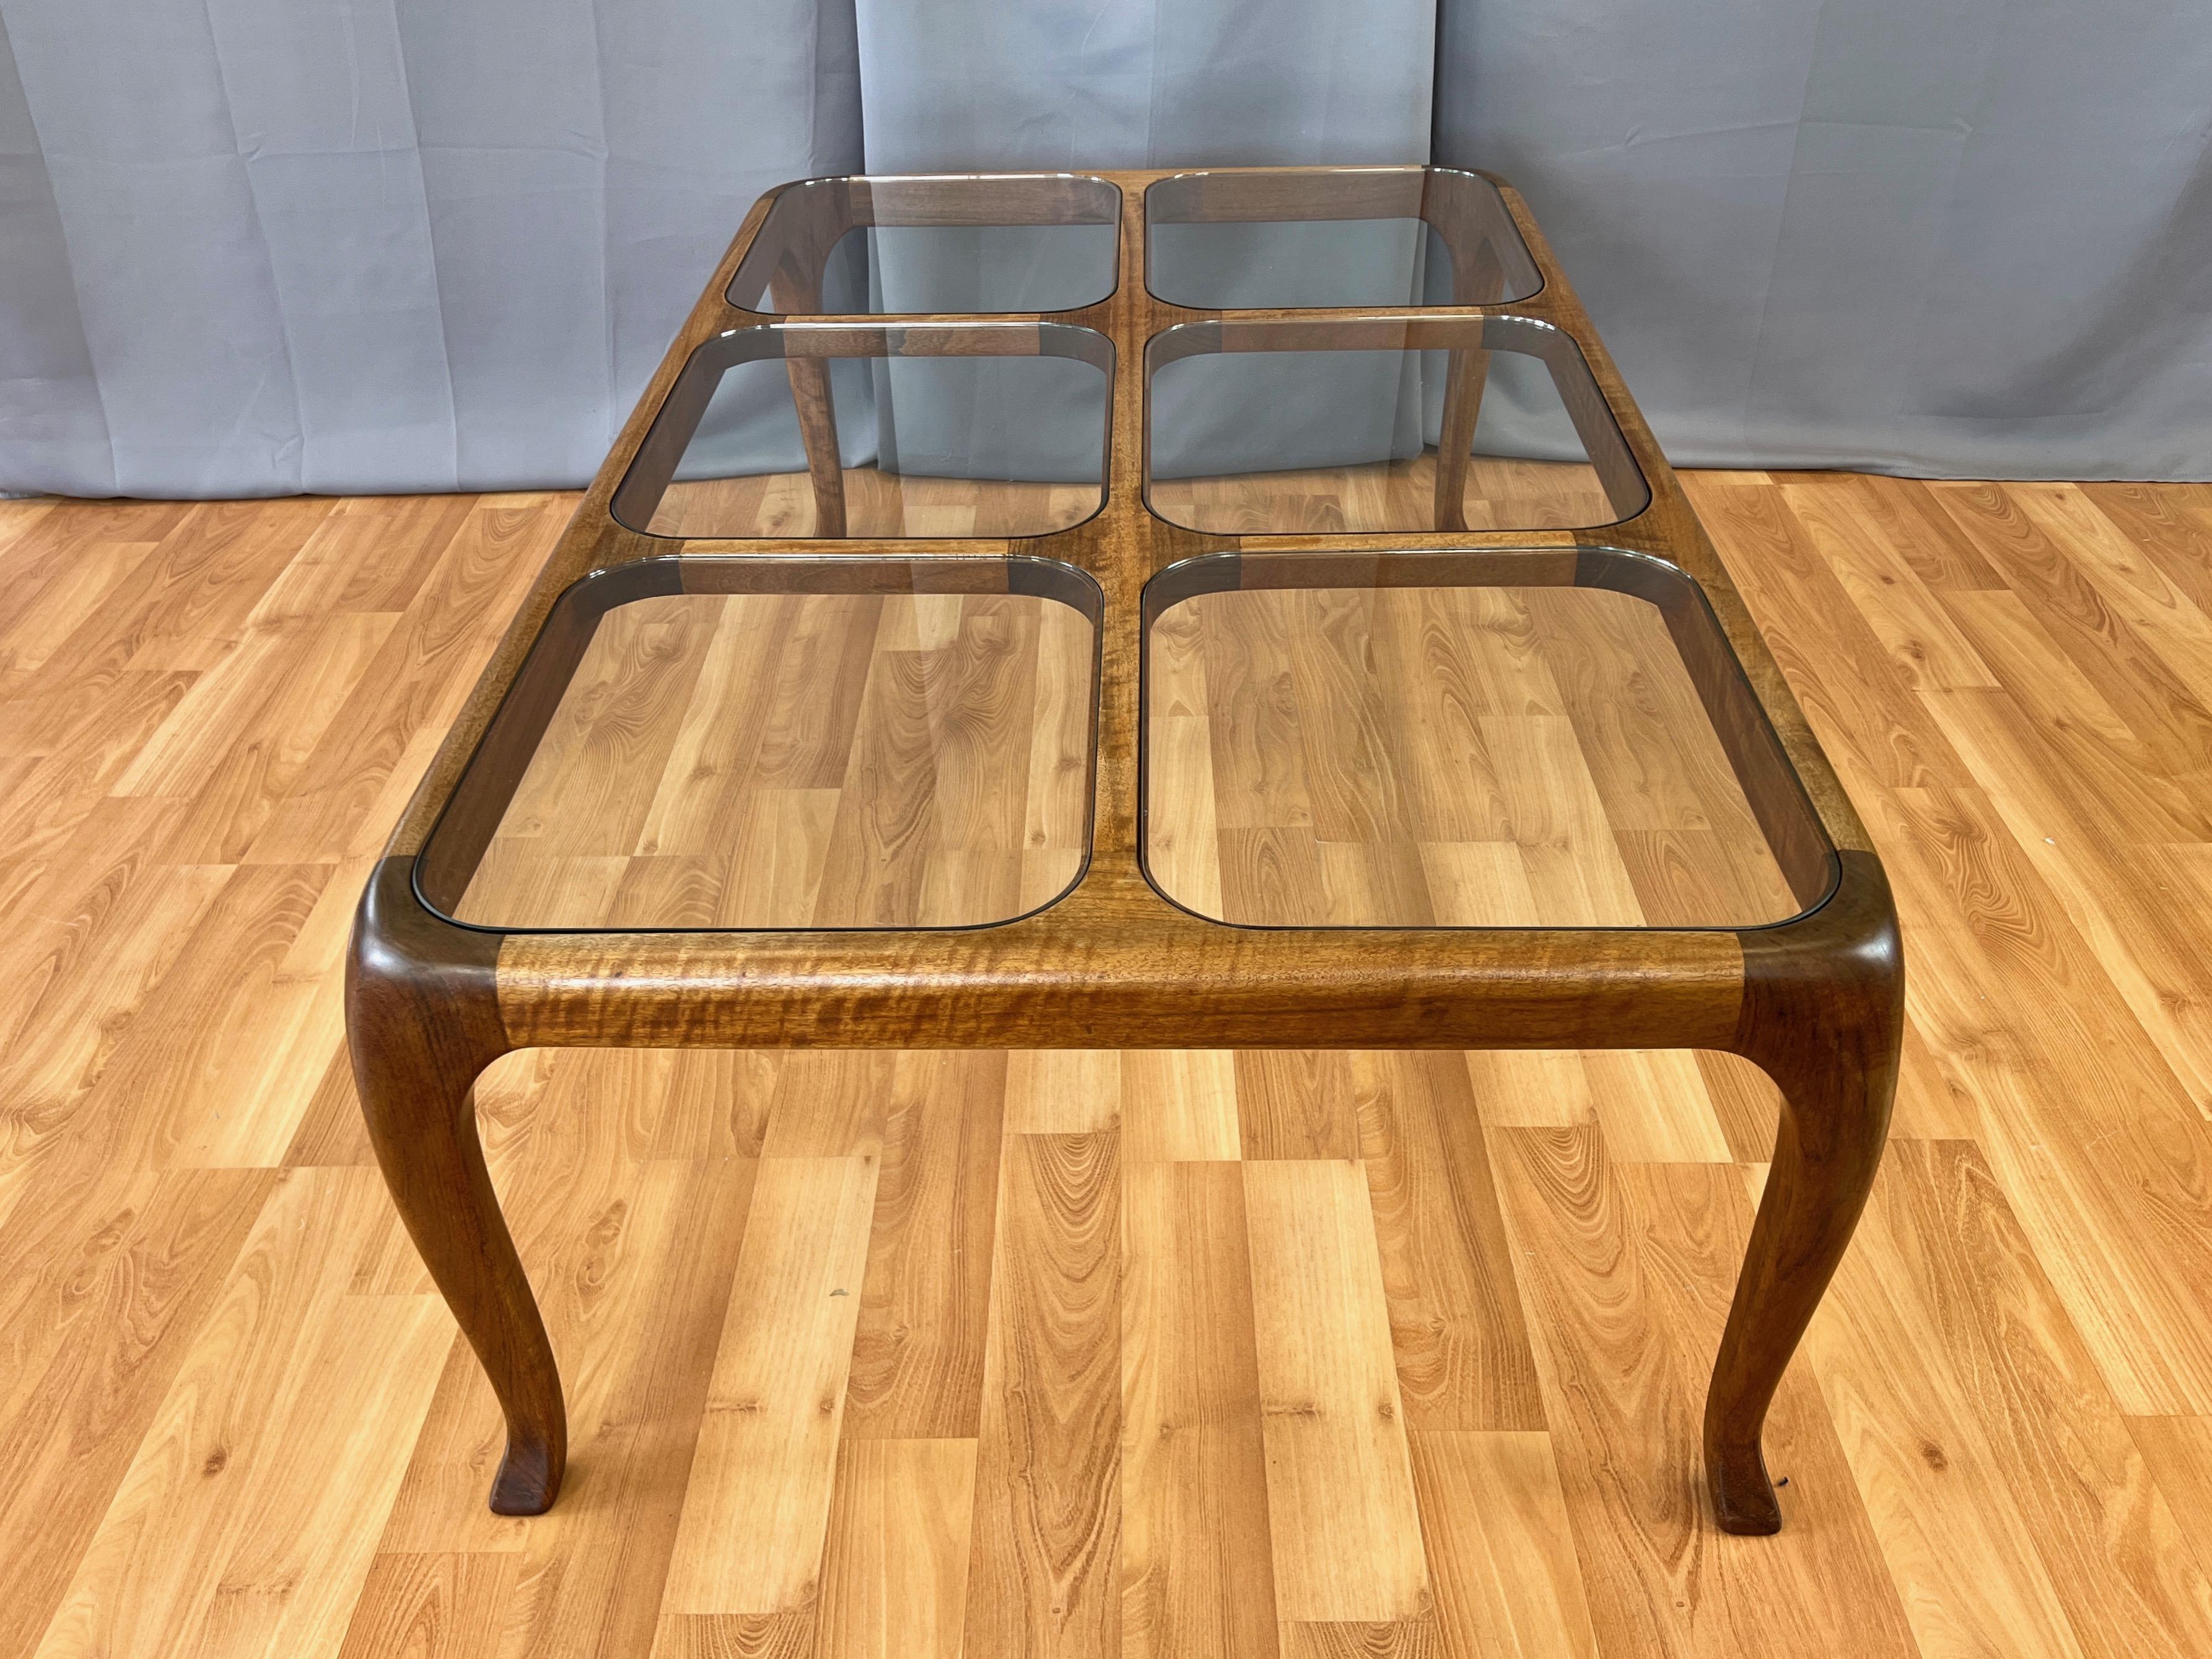 Thomas Saydah Large Walnut and Glass Coffee Table, Signed and Dated, 1982 For Sale 8